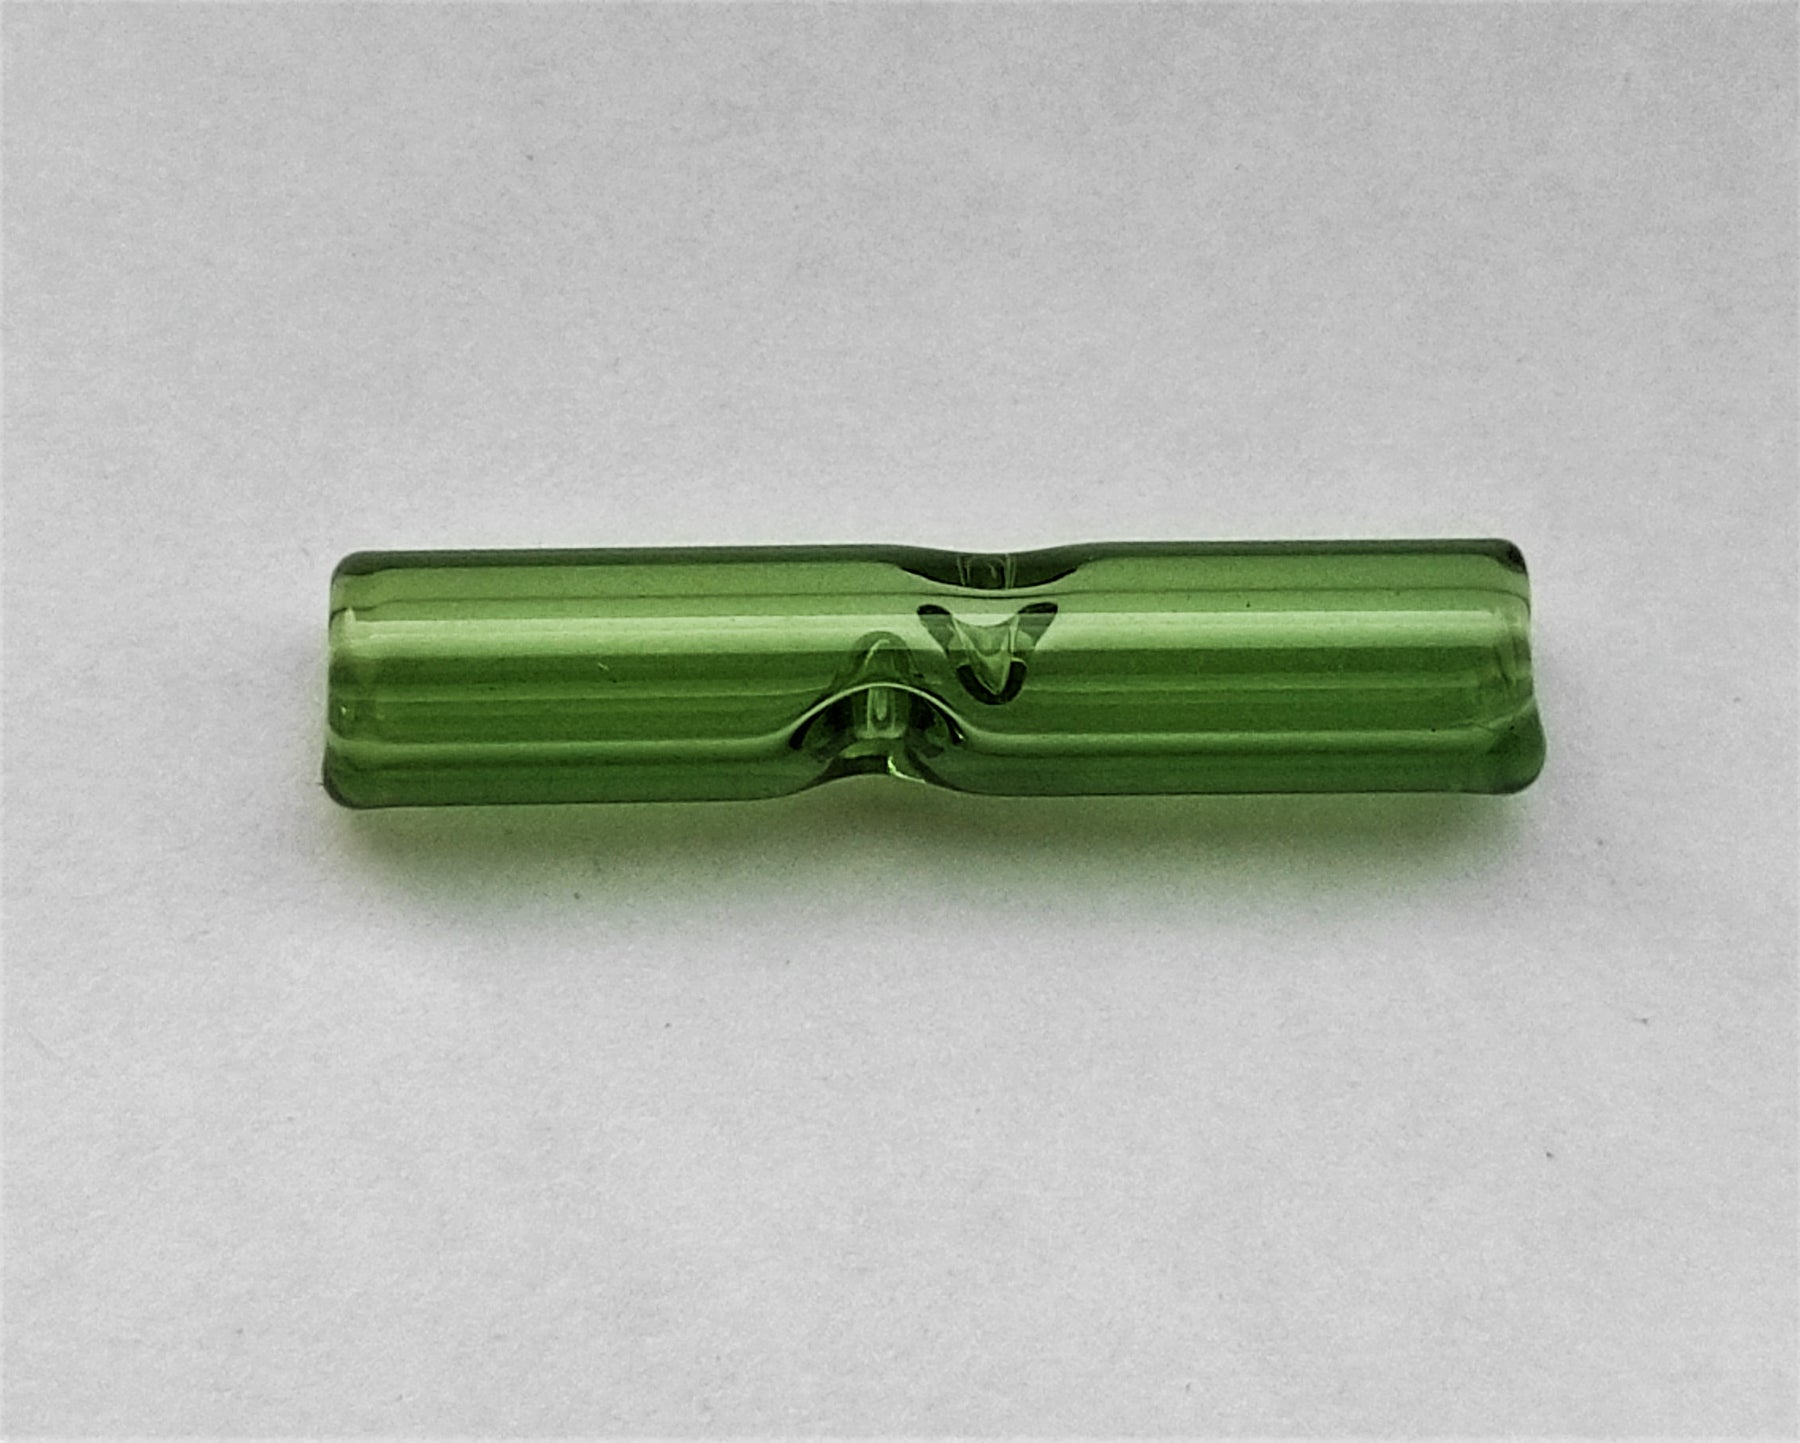 OutonTrip Re-useable Glass Filter Tip - Round Mouthpiece